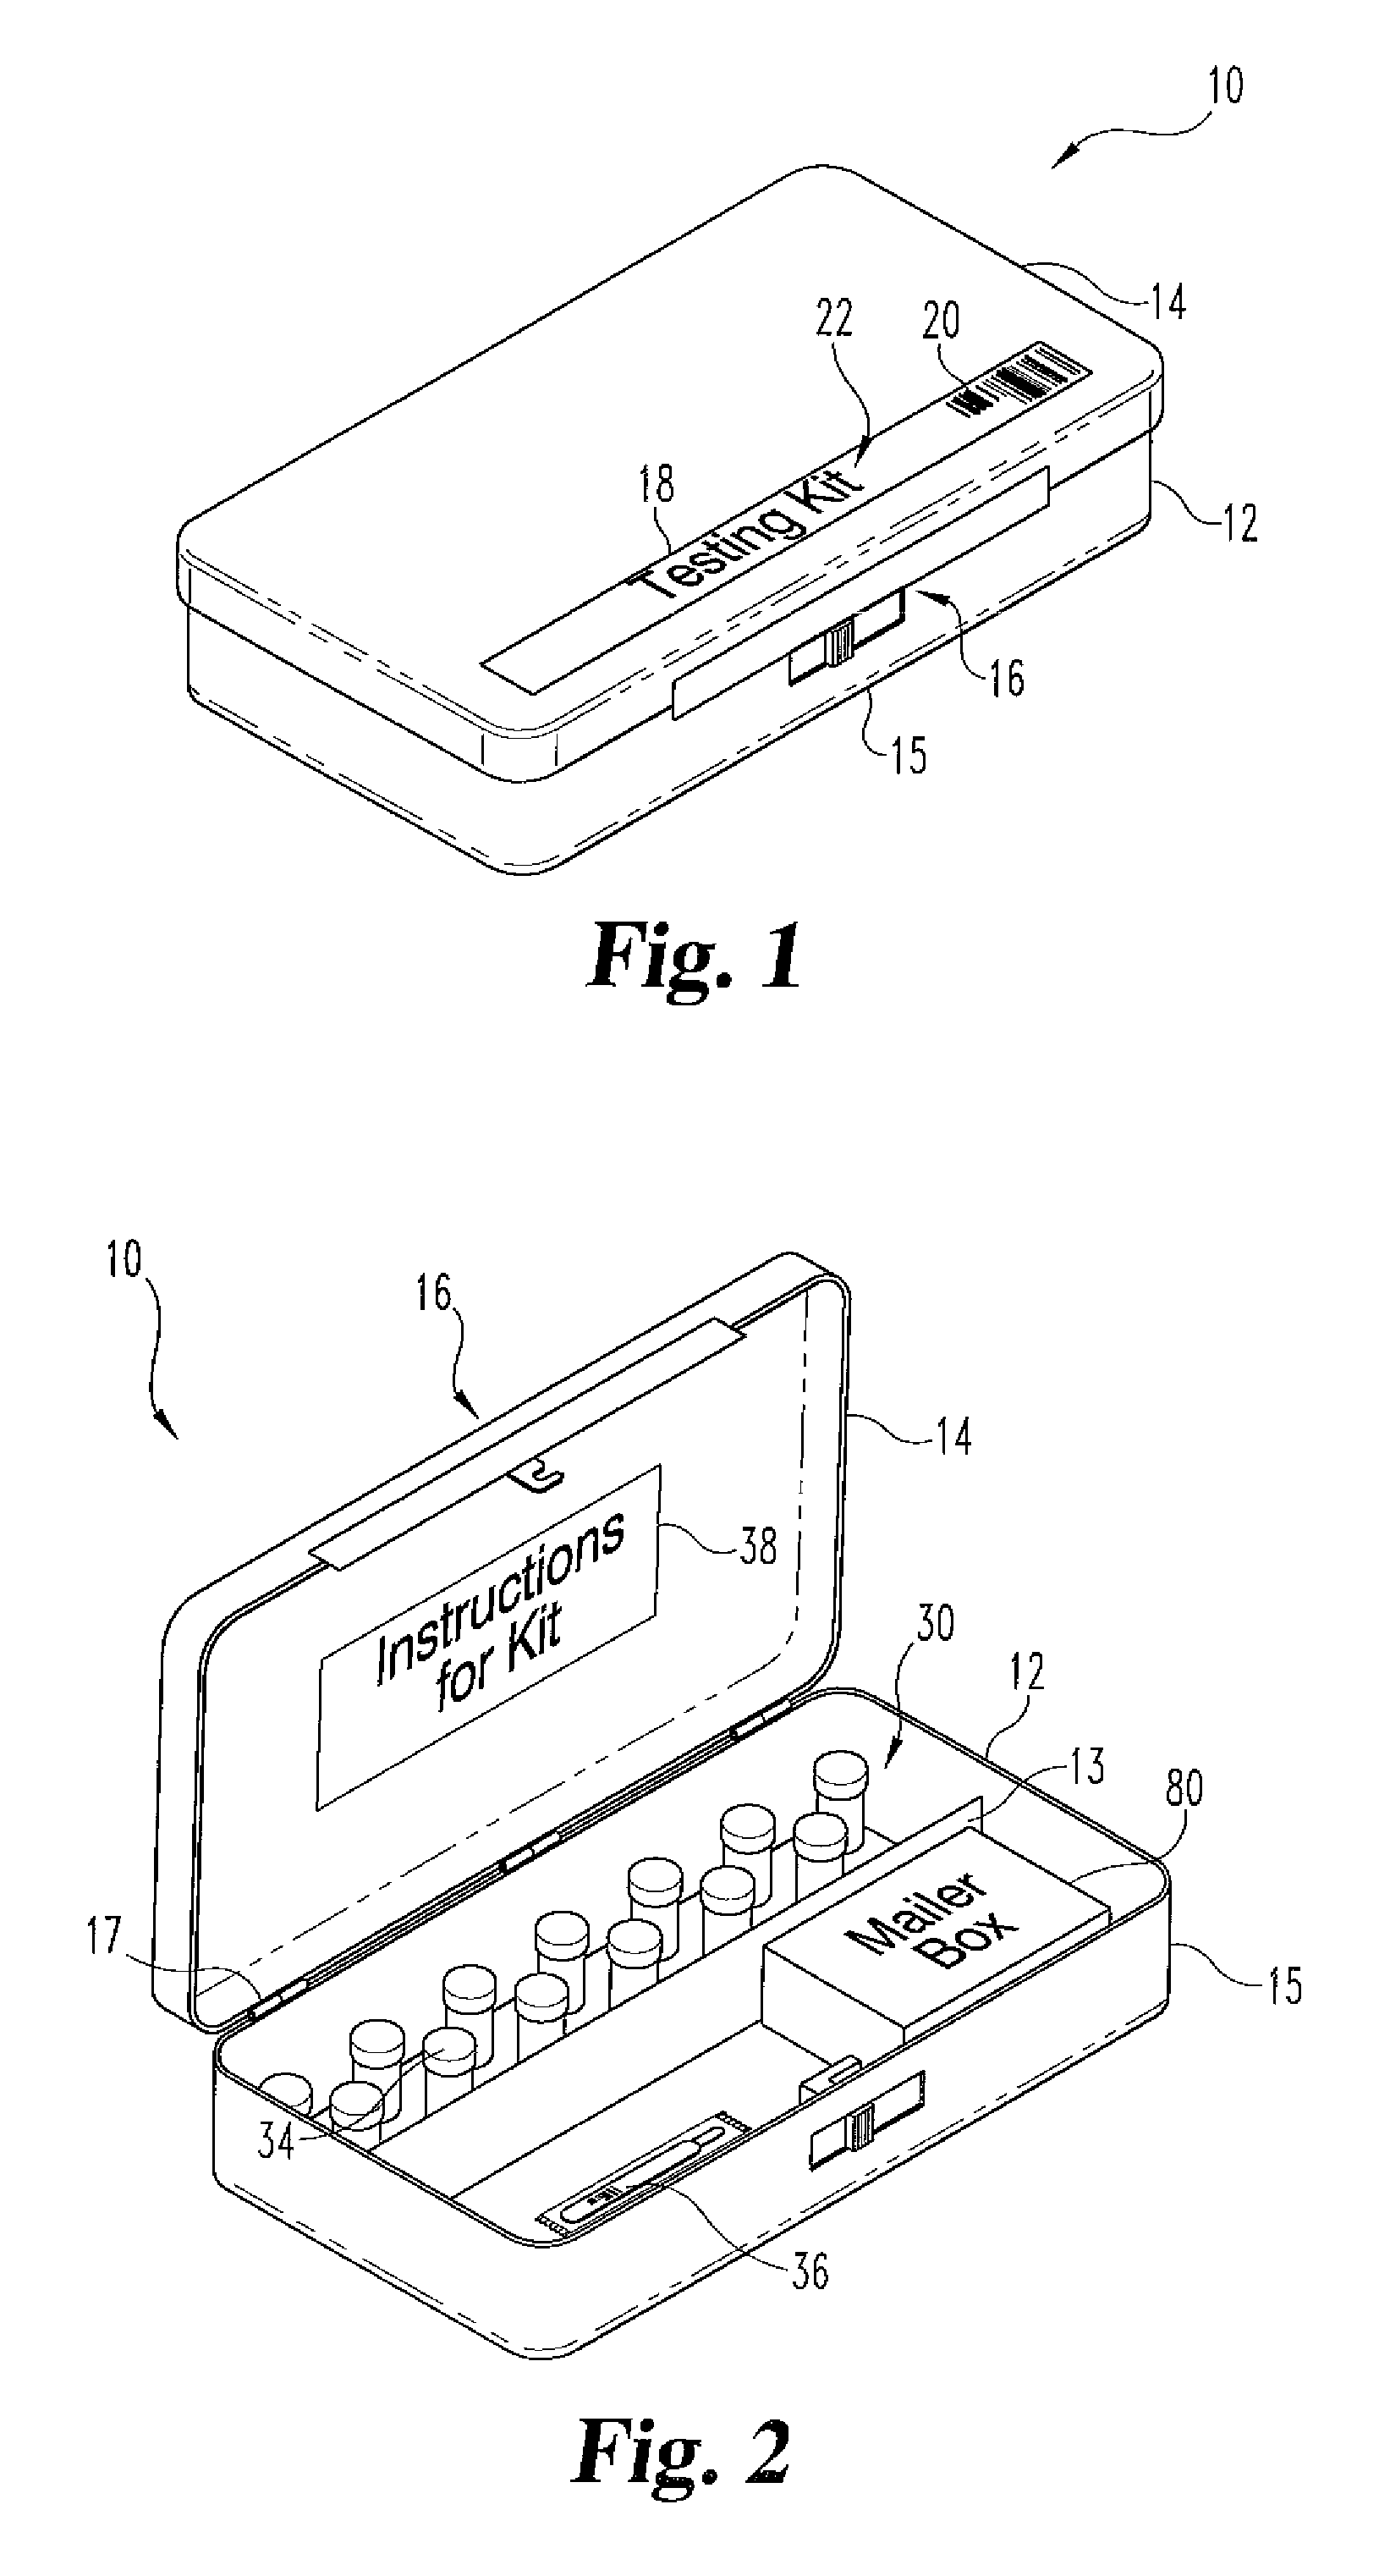 Method and apparatus to minimize diagnostic and other errors due to transposition of biological specimens among subjects